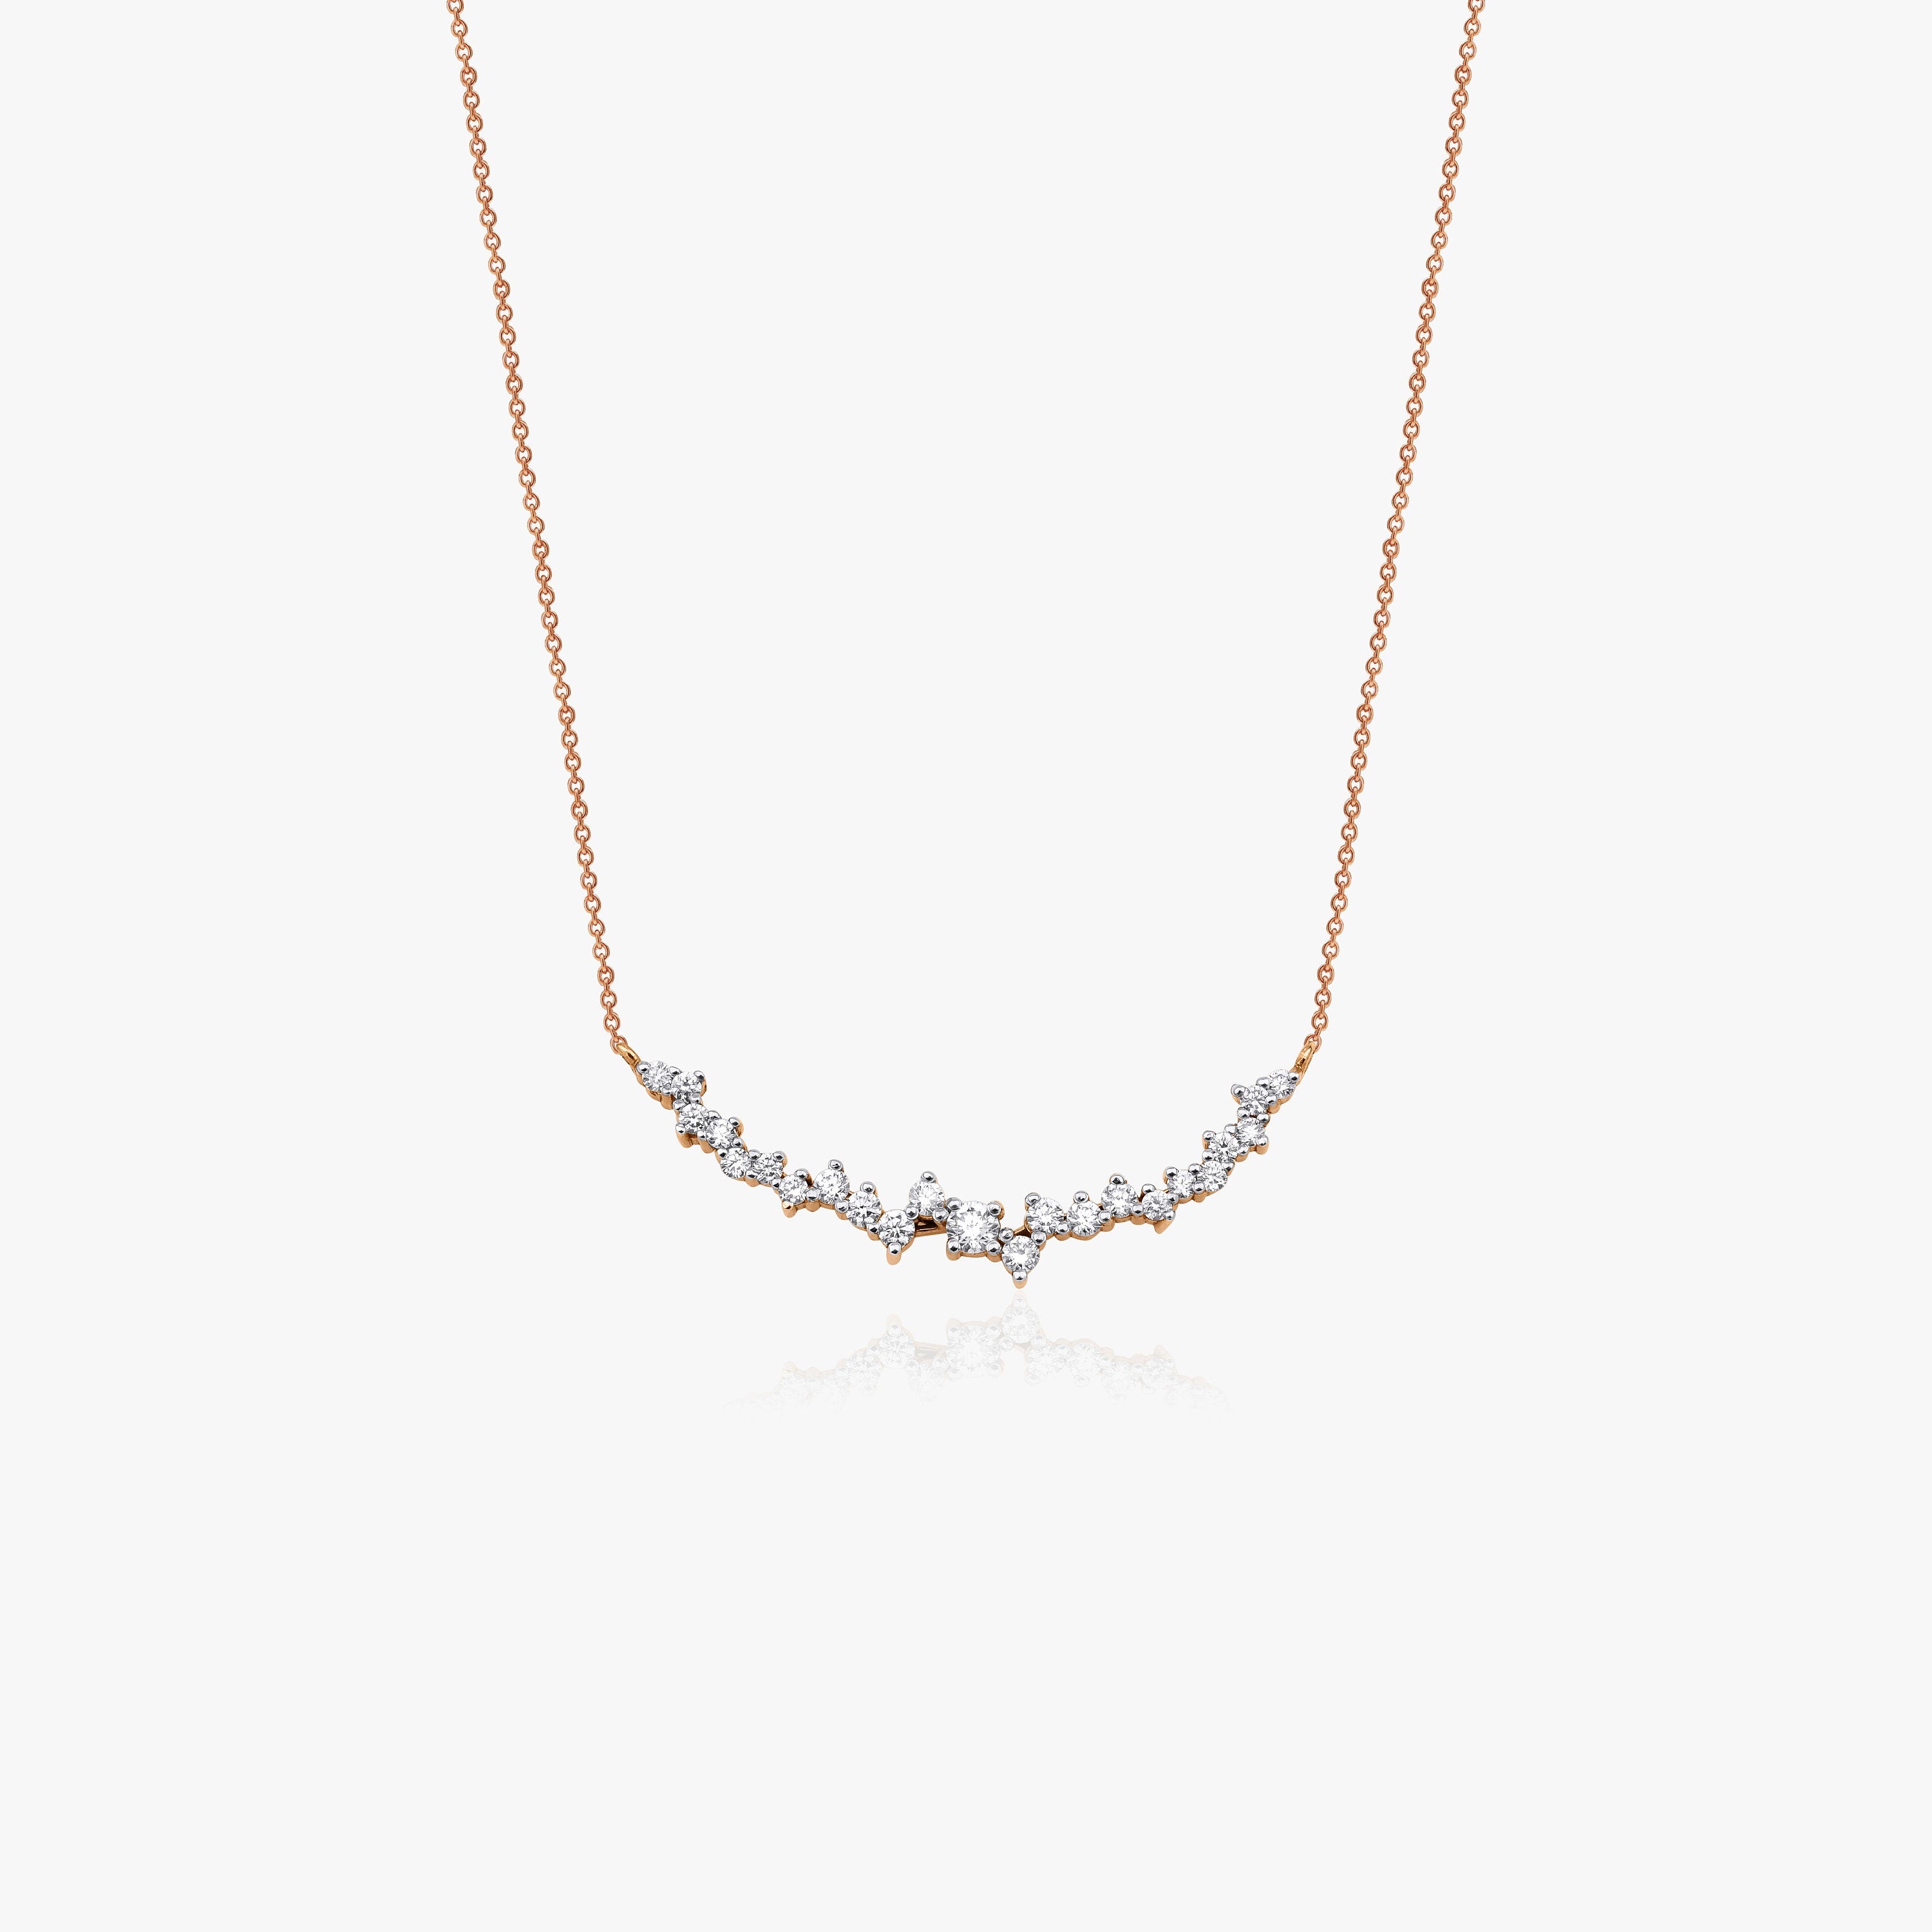 Diamond Cluster Necklace Available in 14K and 18K Gold